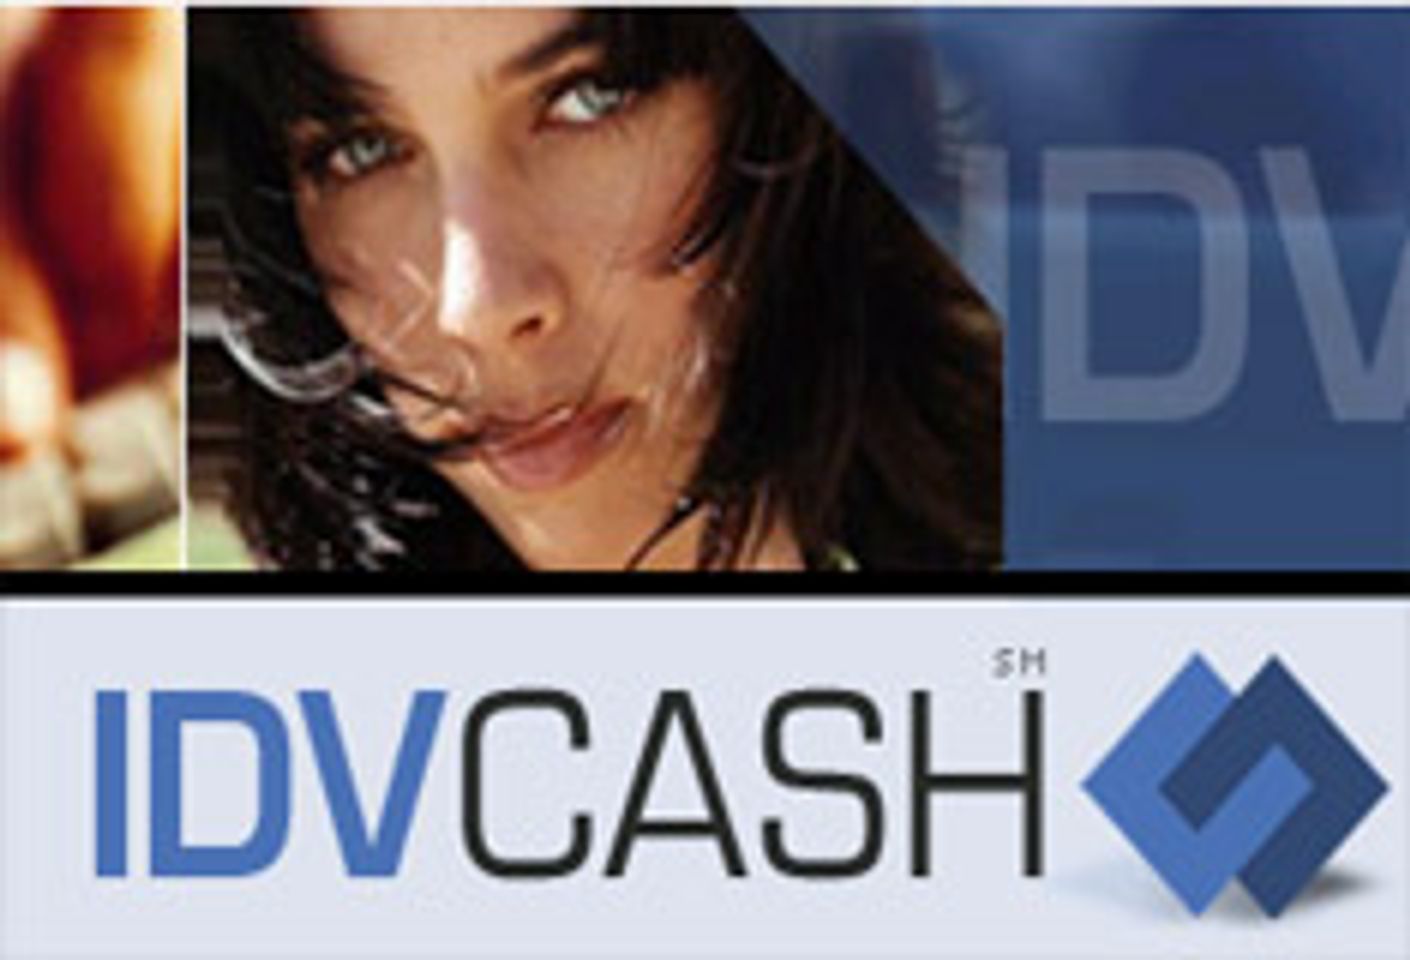 IDVCash.com Announces Increased Holiday Payout